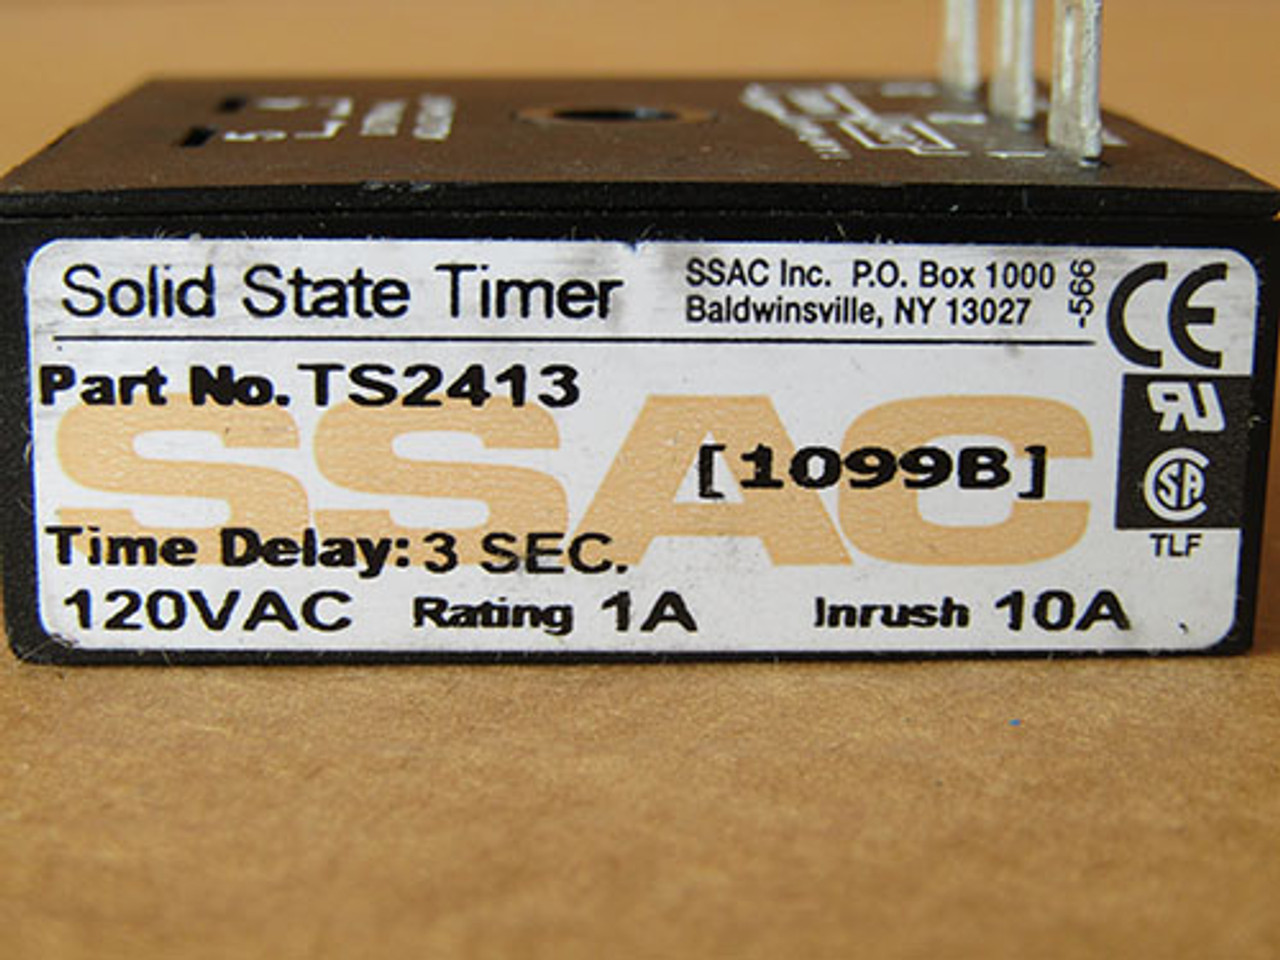 SSAC Solid State Timer TS2413 120VAC Rating 1A Inrush 10A - New